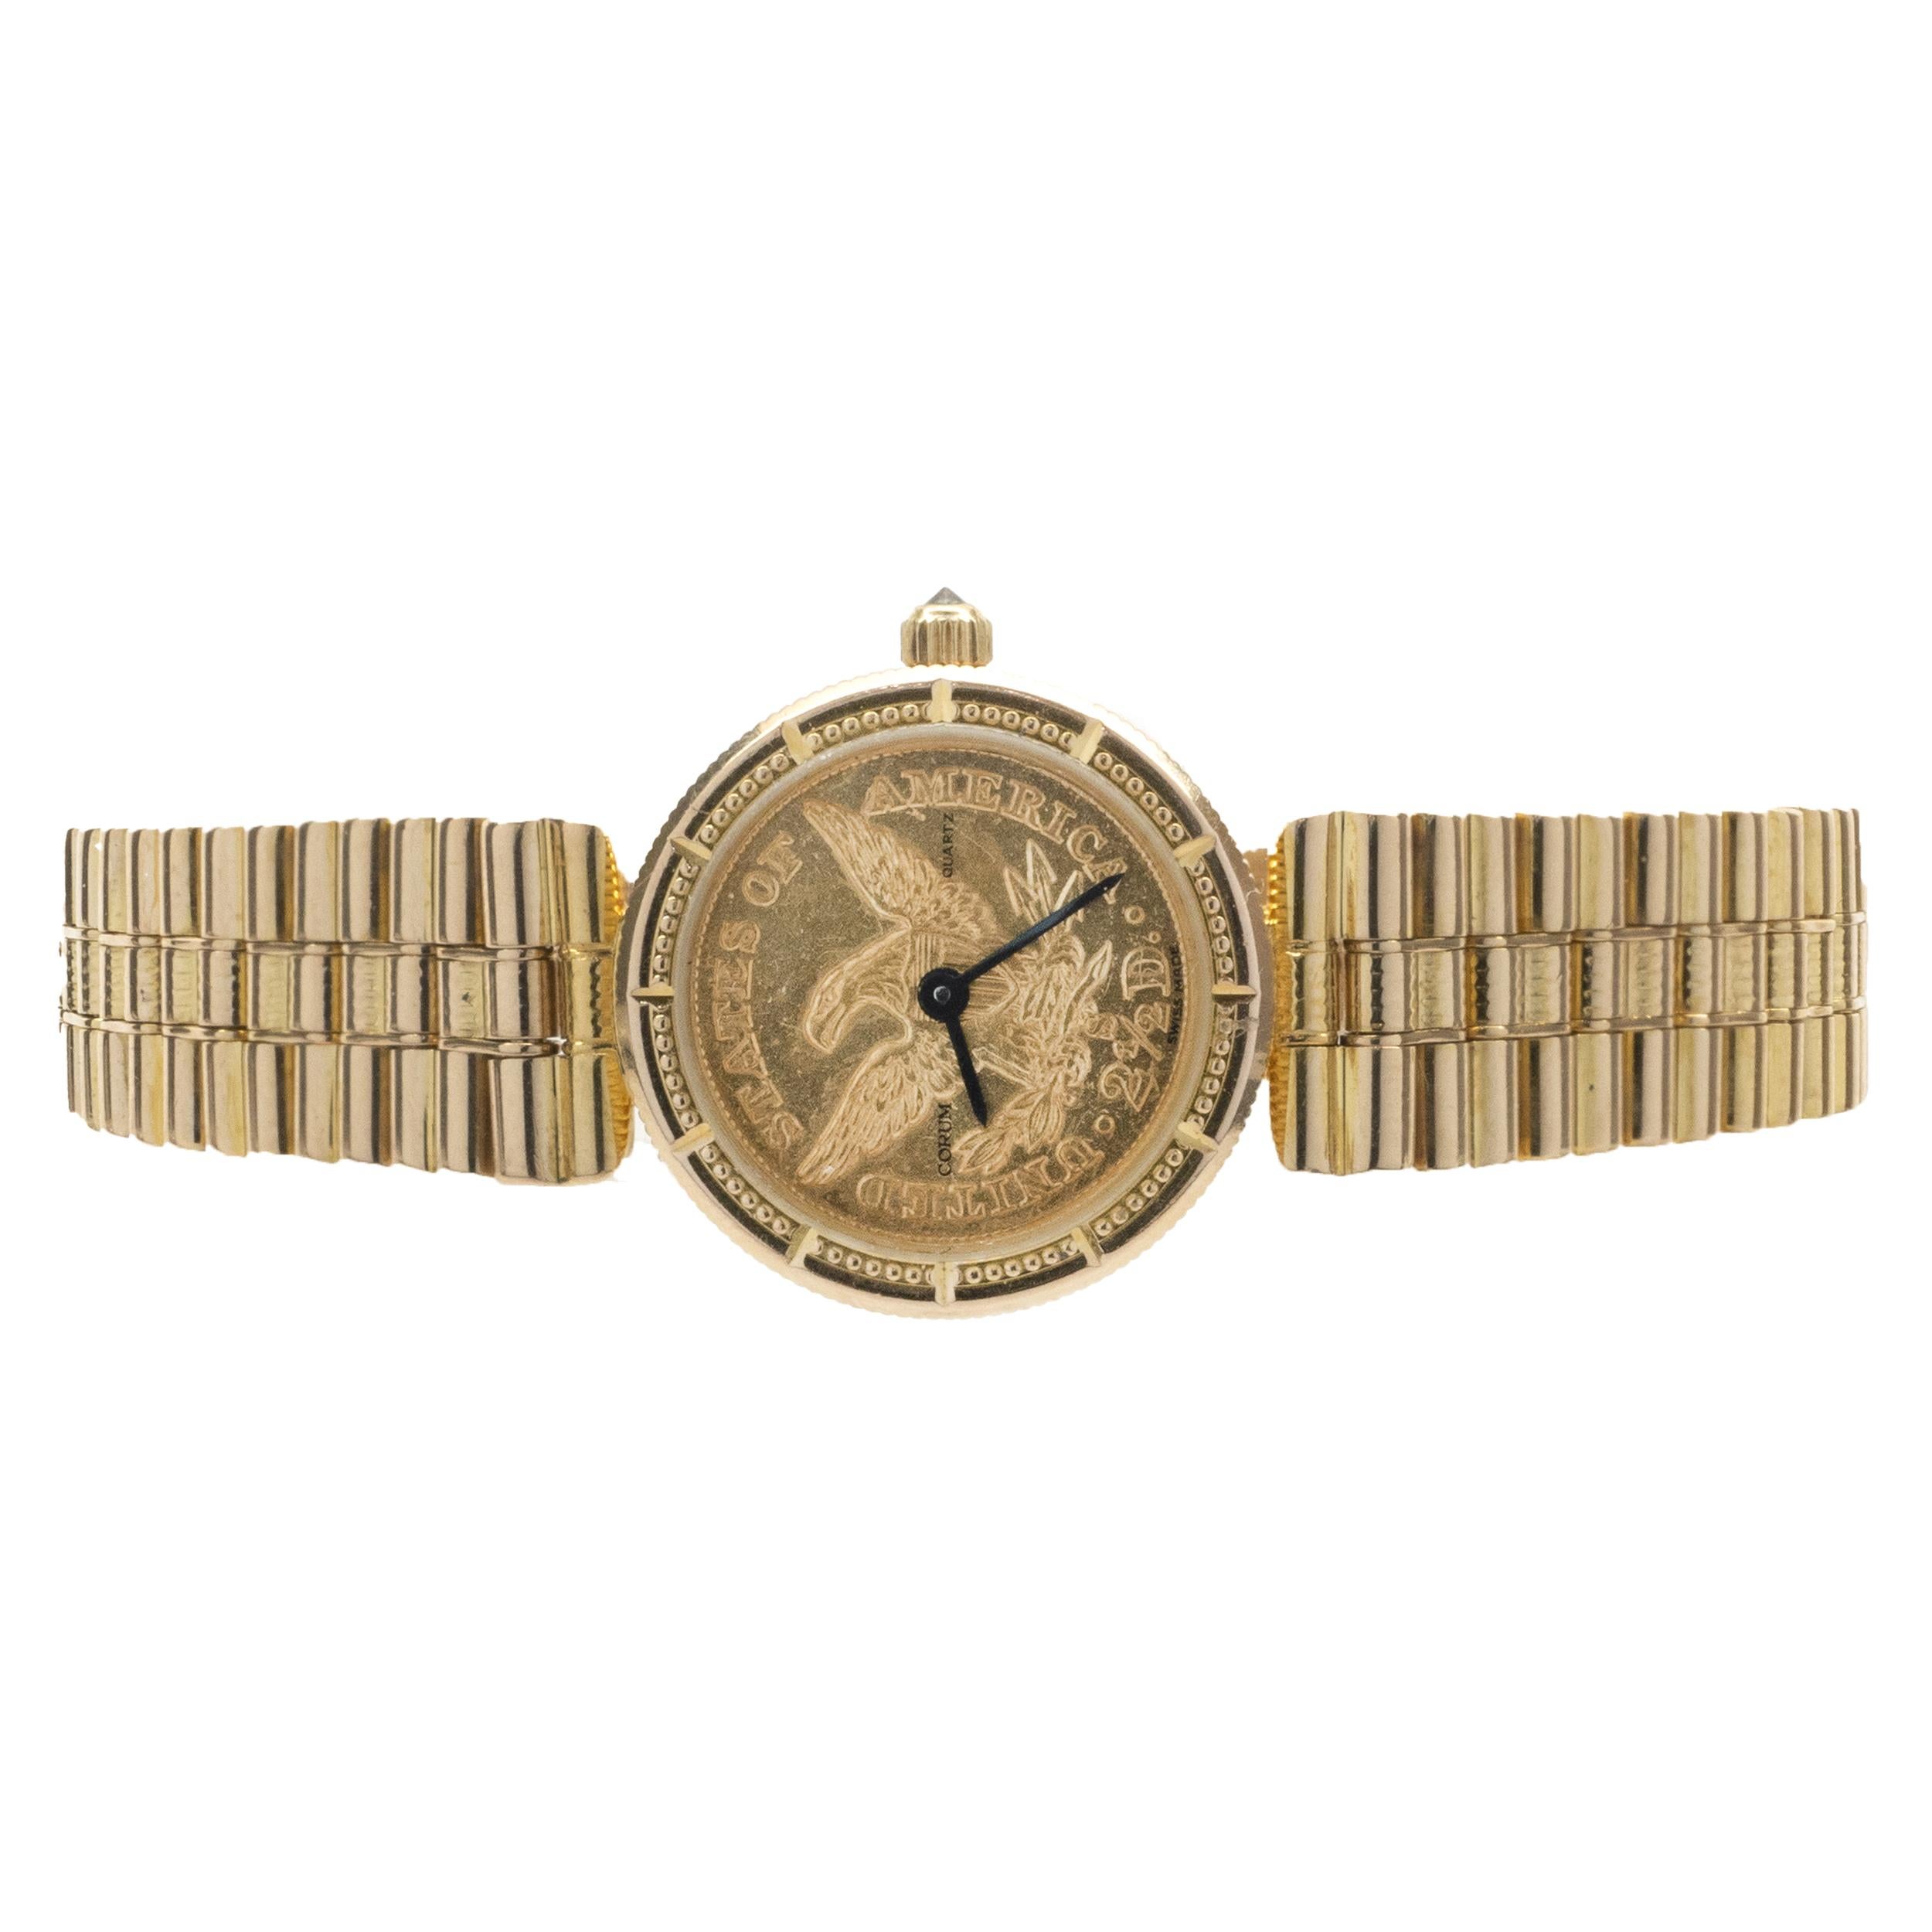 Movement: quartz
Function: hours, minutes
Case: 20mm round 18K yellow gold case, sapphire crystal, push/pull crown
Band: 18K yellow gold bracelet
Dial: 1887 $2.50 Liberty coin
Serial #: 376XXX
Does not come with original box and